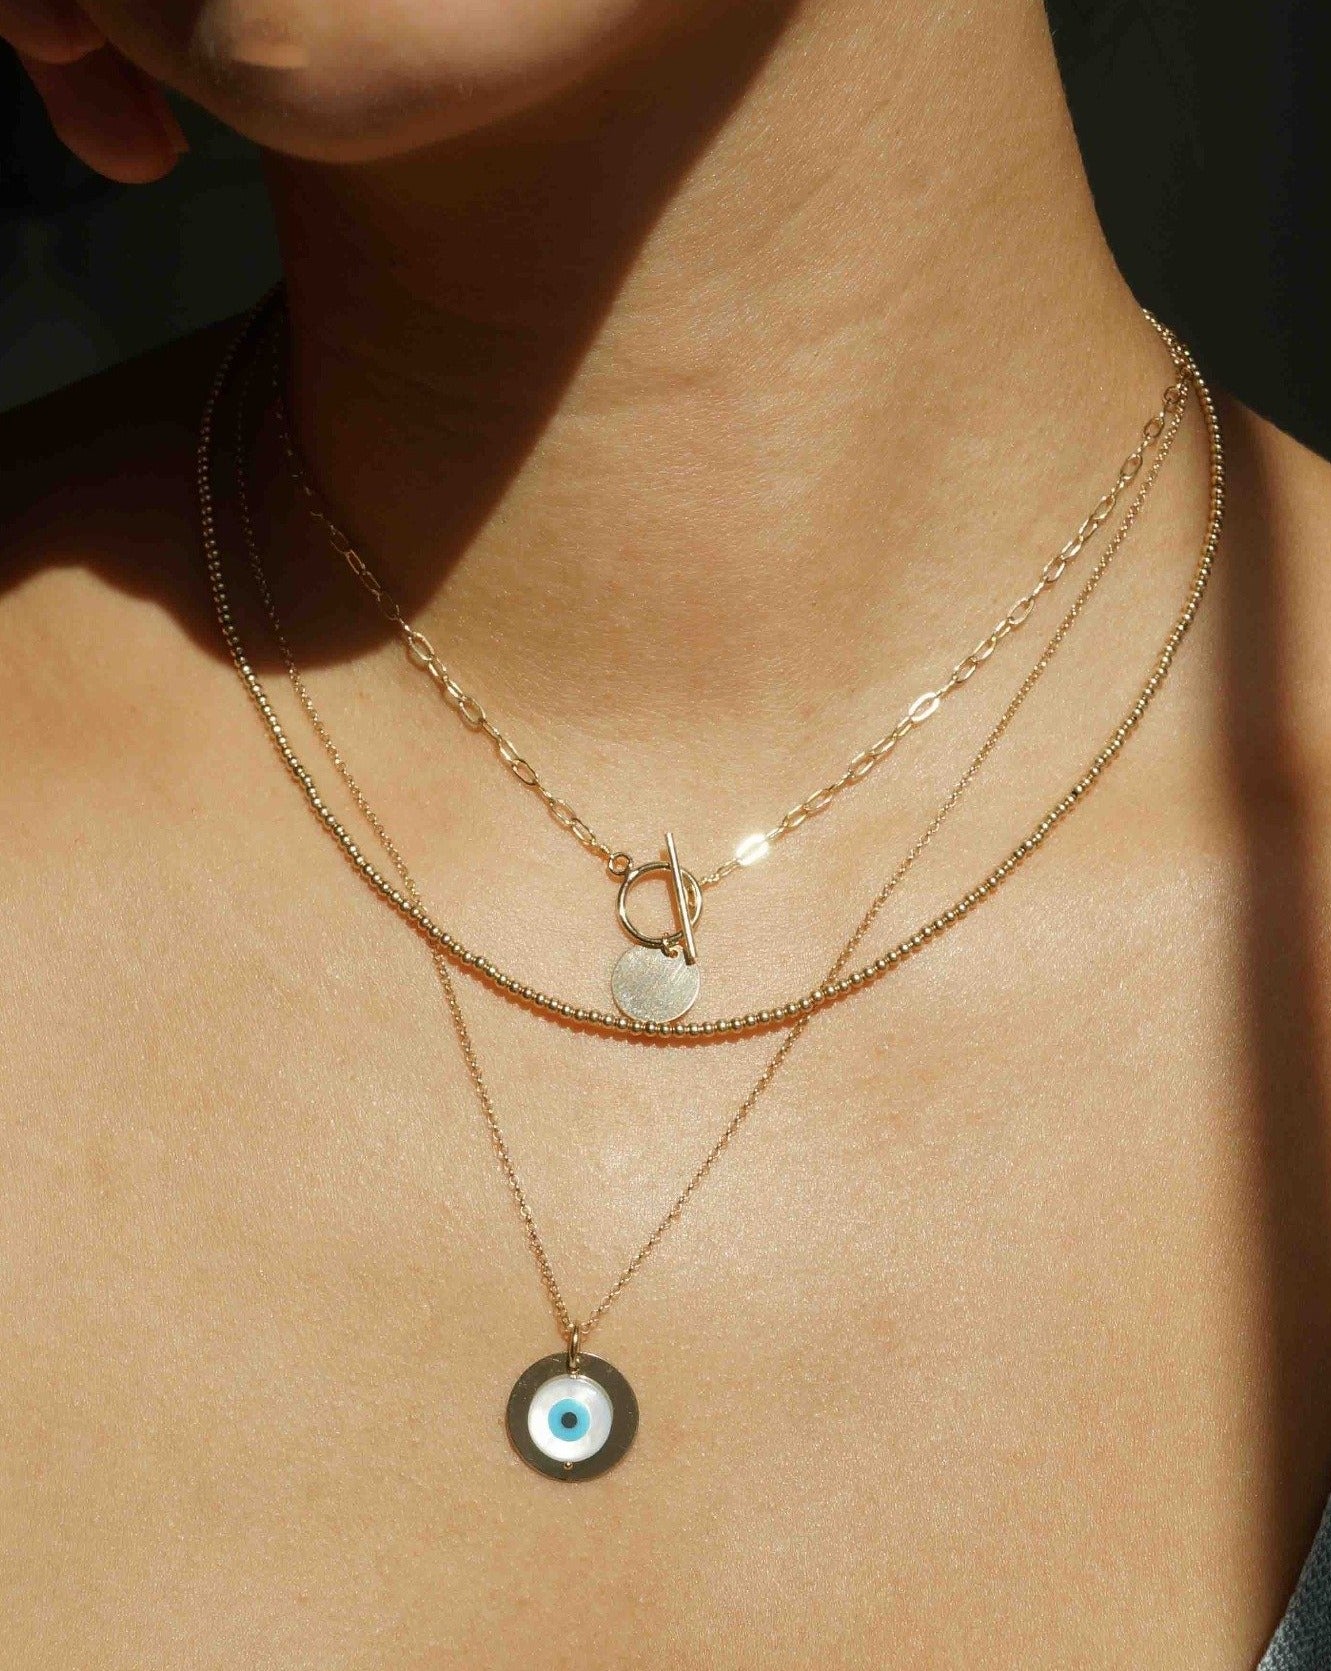 Cappa Necklace by KOZAKH. A 16 to 18 inch adjustable length necklace in 14K Gold Filled, featuring a coin charm.